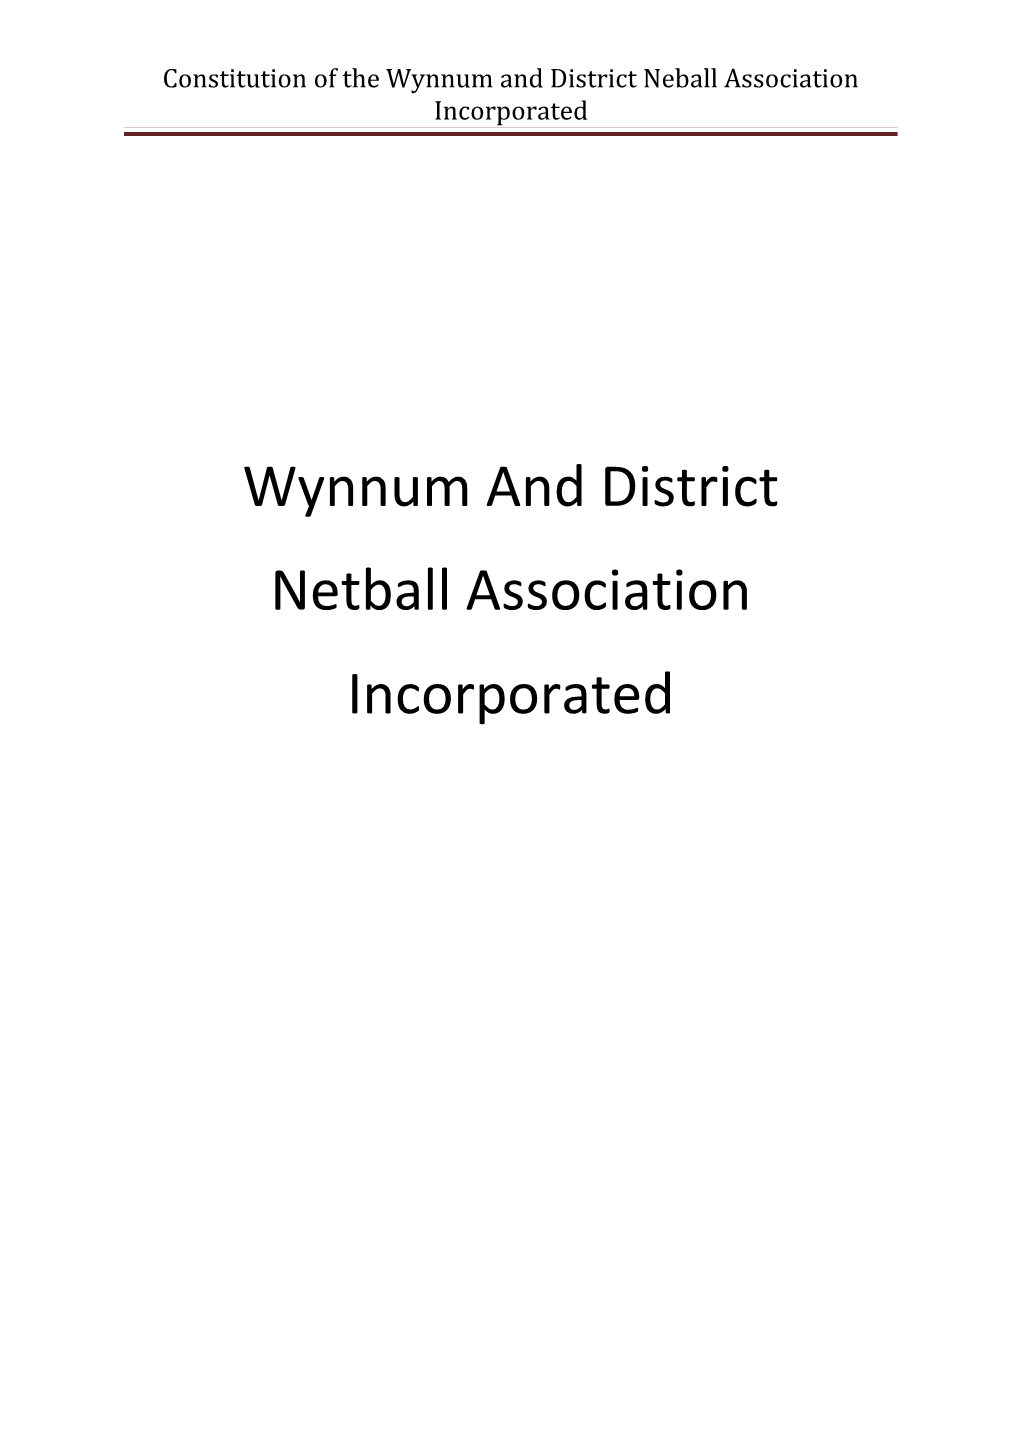 Constitution of the Wynnum and District Neball Association Incorporated